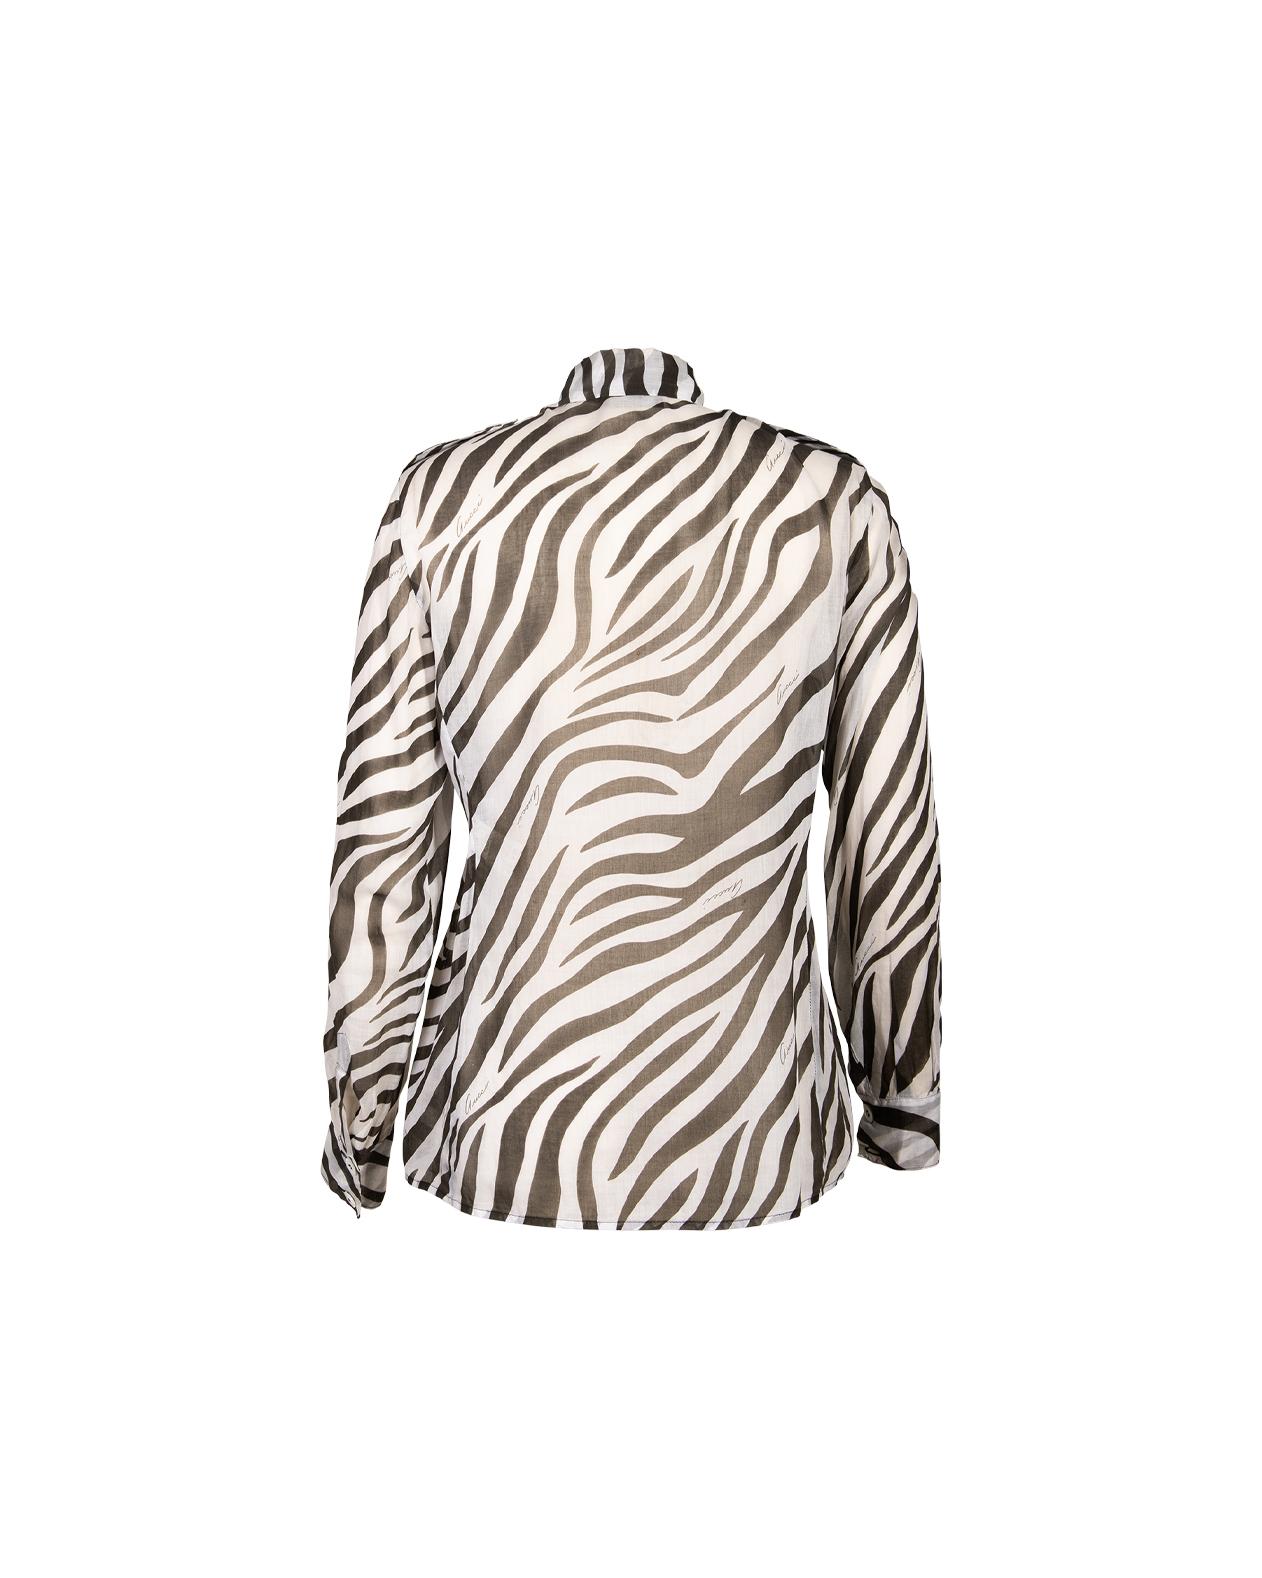 Women's S/S 1996 Gucci by Tom Ford Zebra Print Cotton Top